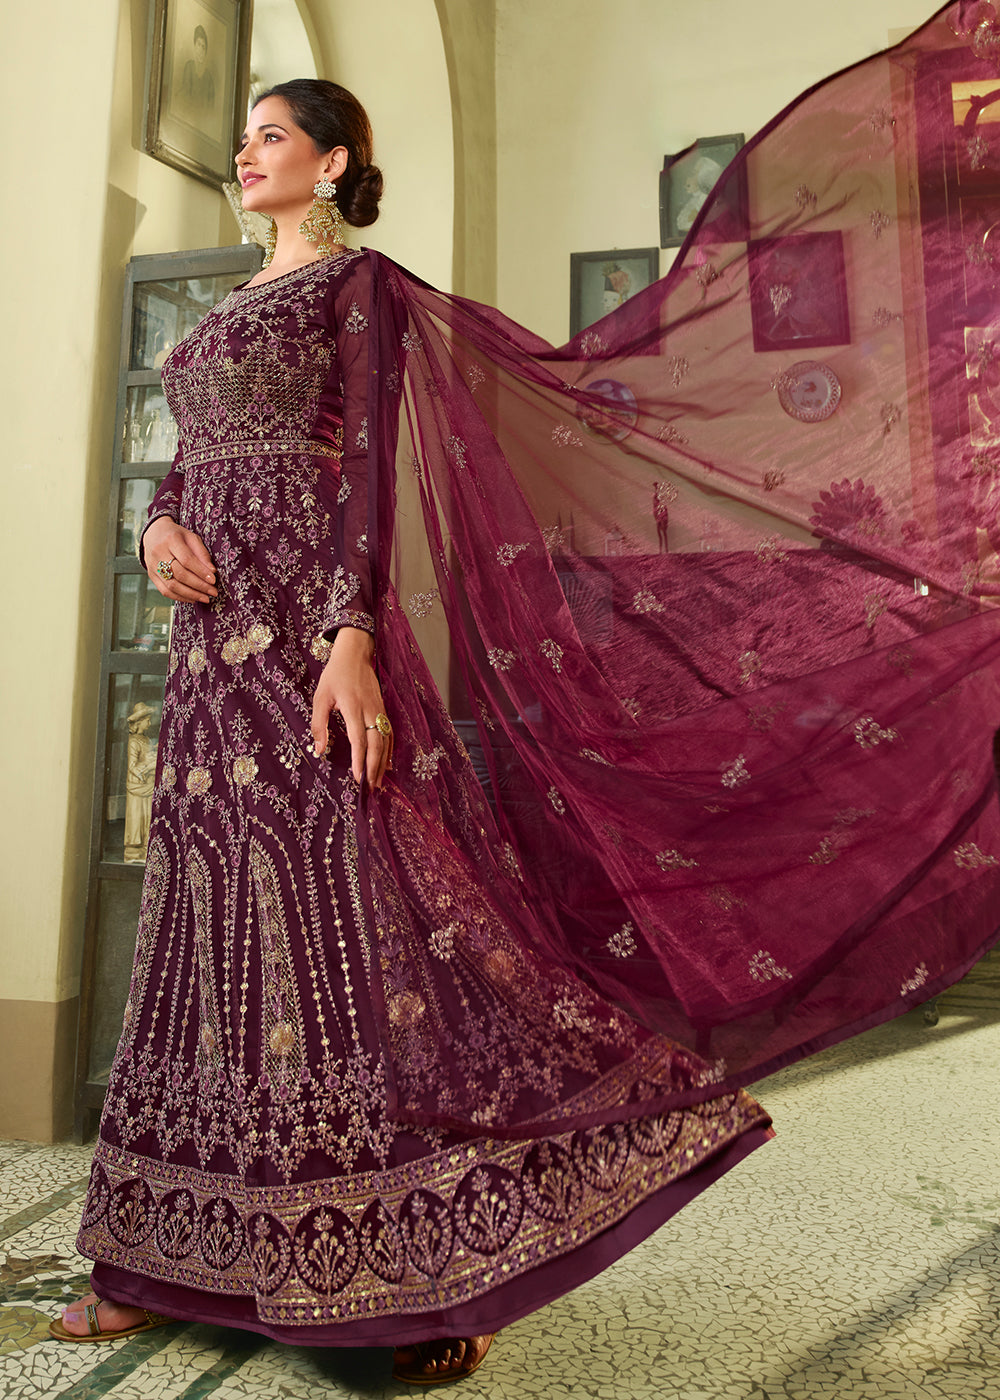 Buy Now Slit Style Outstanding Purple Zari Embroidered Party Festive Anarkali Suit Online in USA, UK, Australia, New Zealand, Canada & Worldwide at Empress Clothing. 